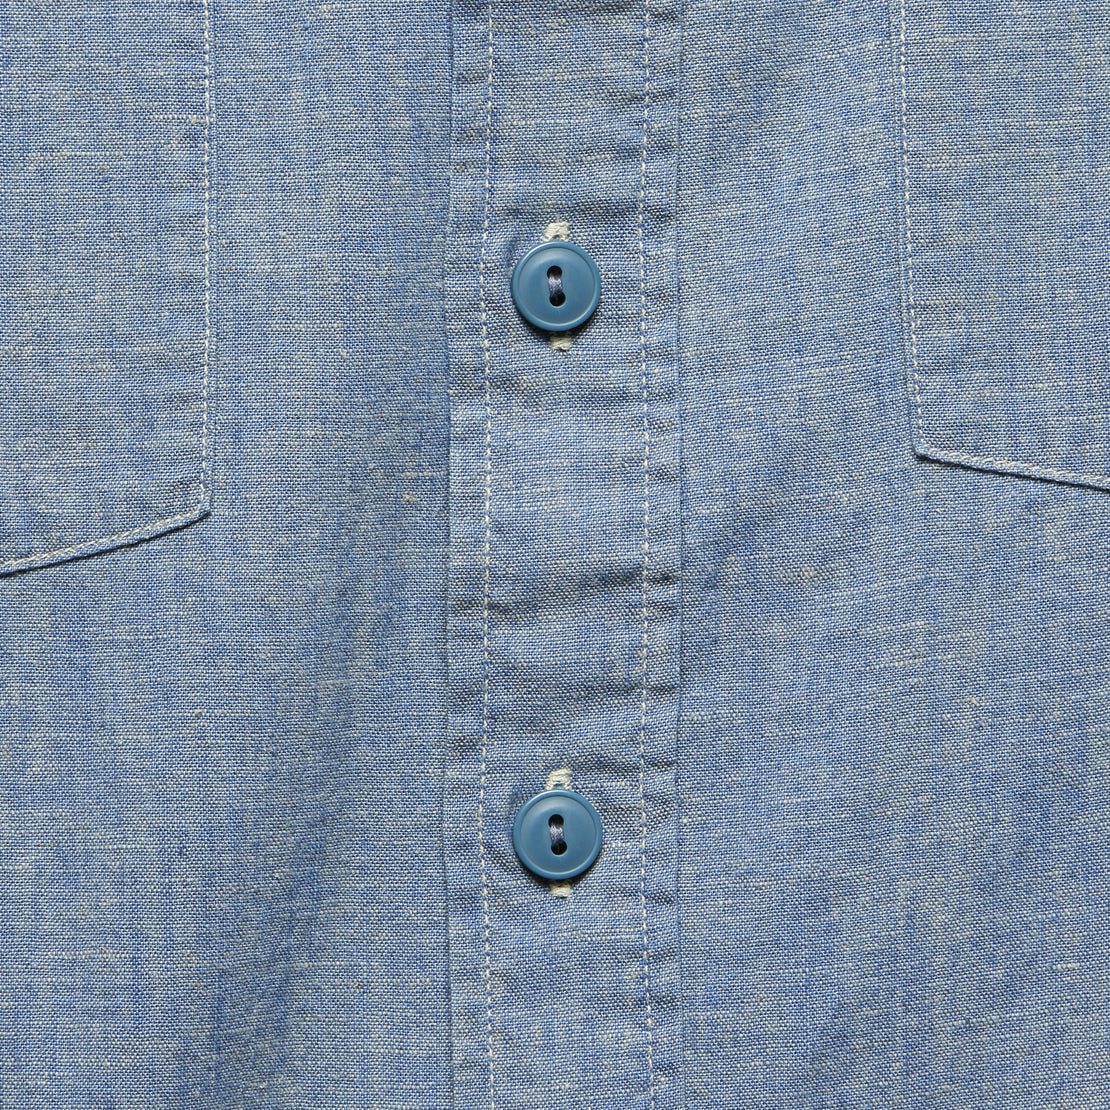 Chambray Pryce Workshirt - Riverview Wash - RRL - STAG Provisions - Tops - S/S Woven - Solid